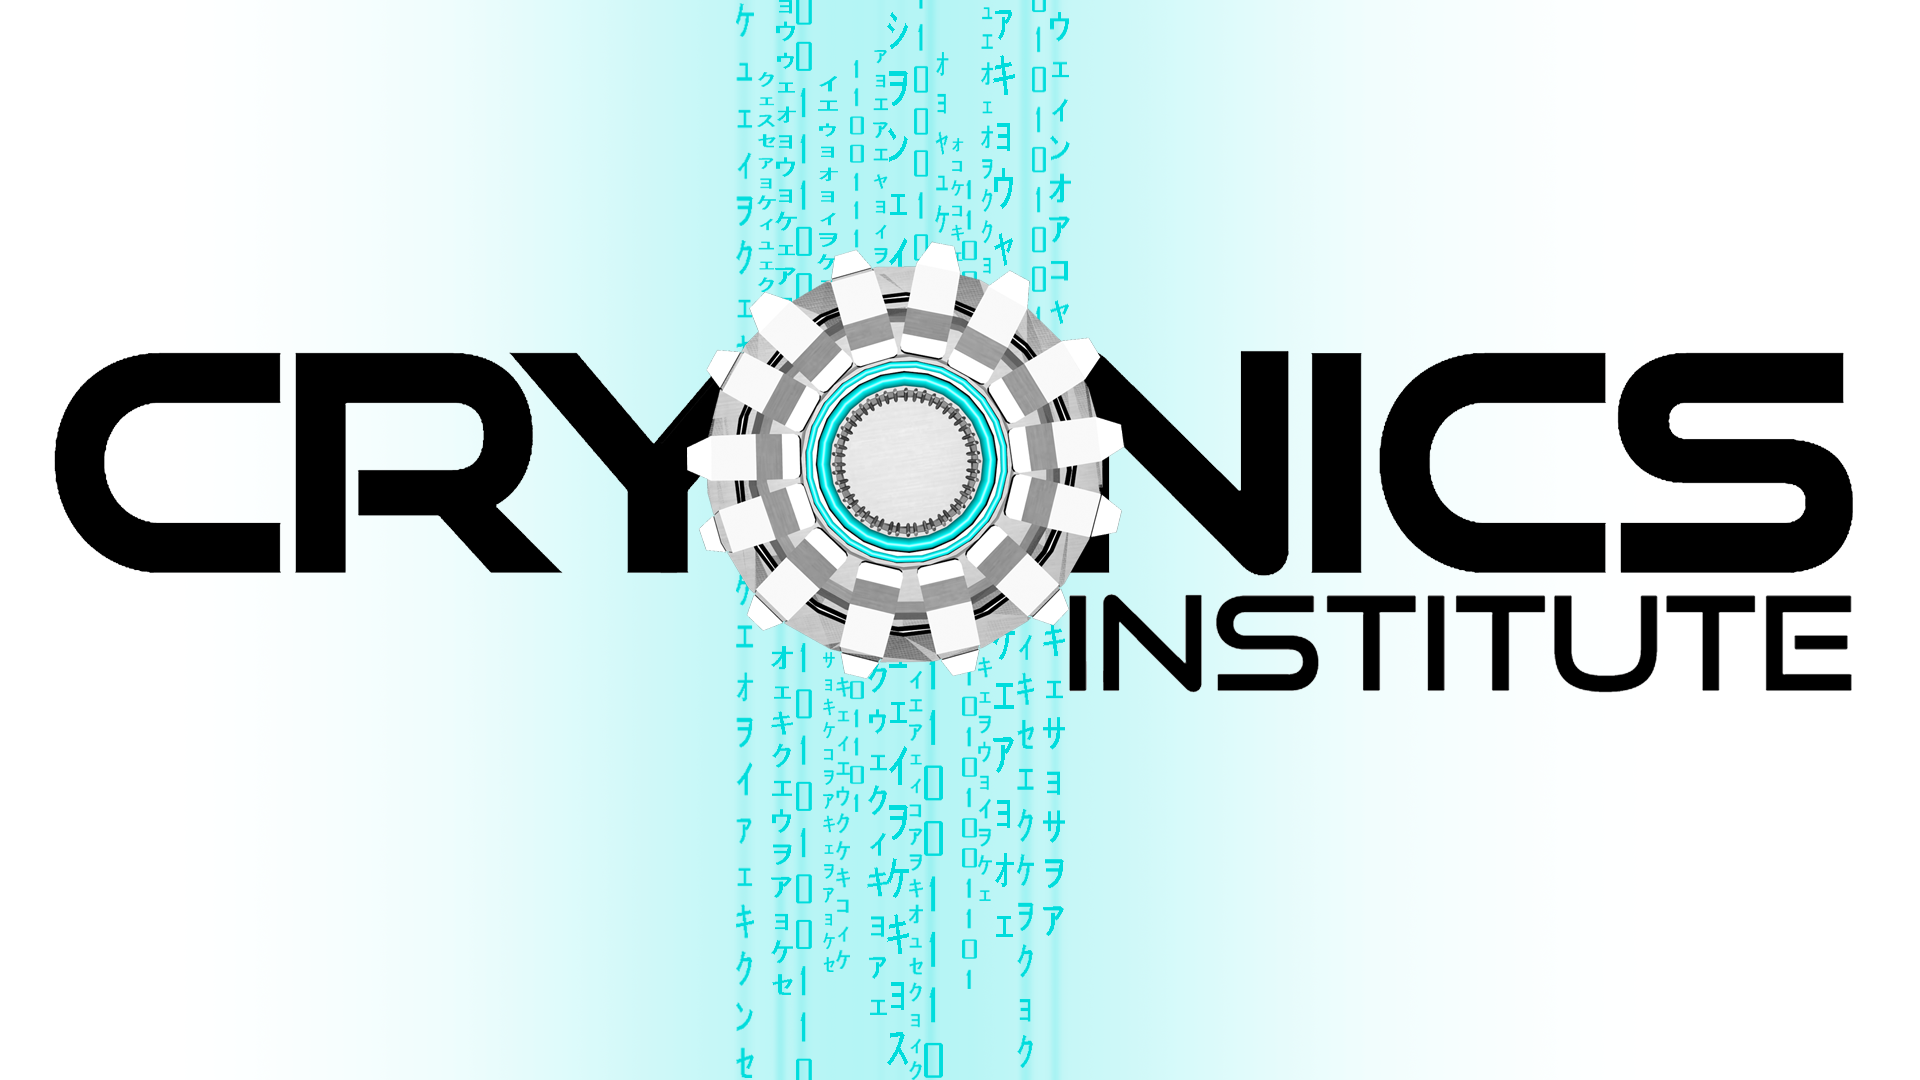 General 1920x1080 Cryonics Institute Cryonics science technology cyan